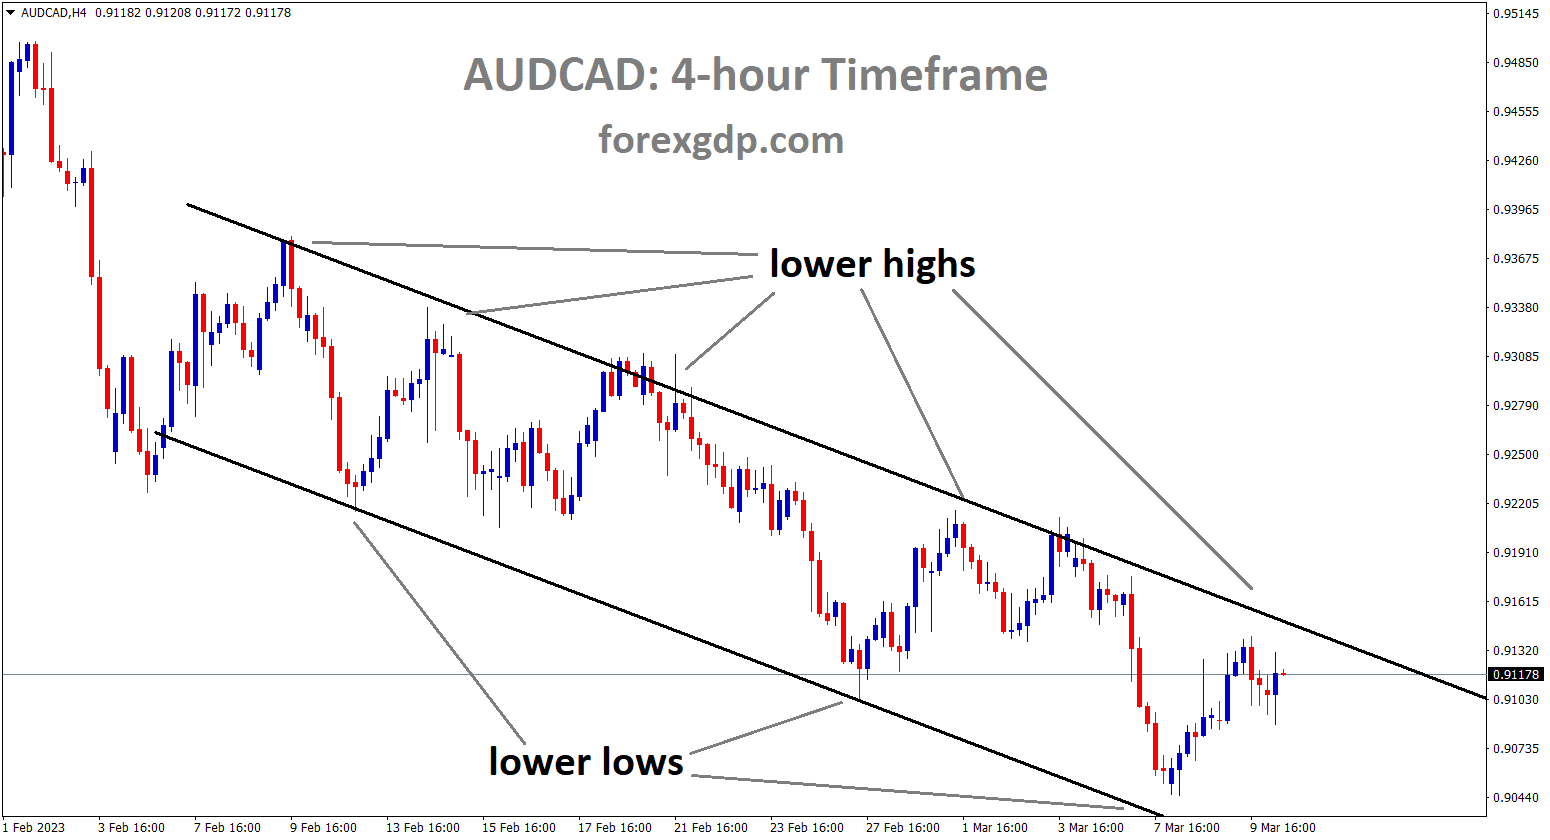 AUDCAD is moving in descending channel and the market has reached the lower high area of the channel.